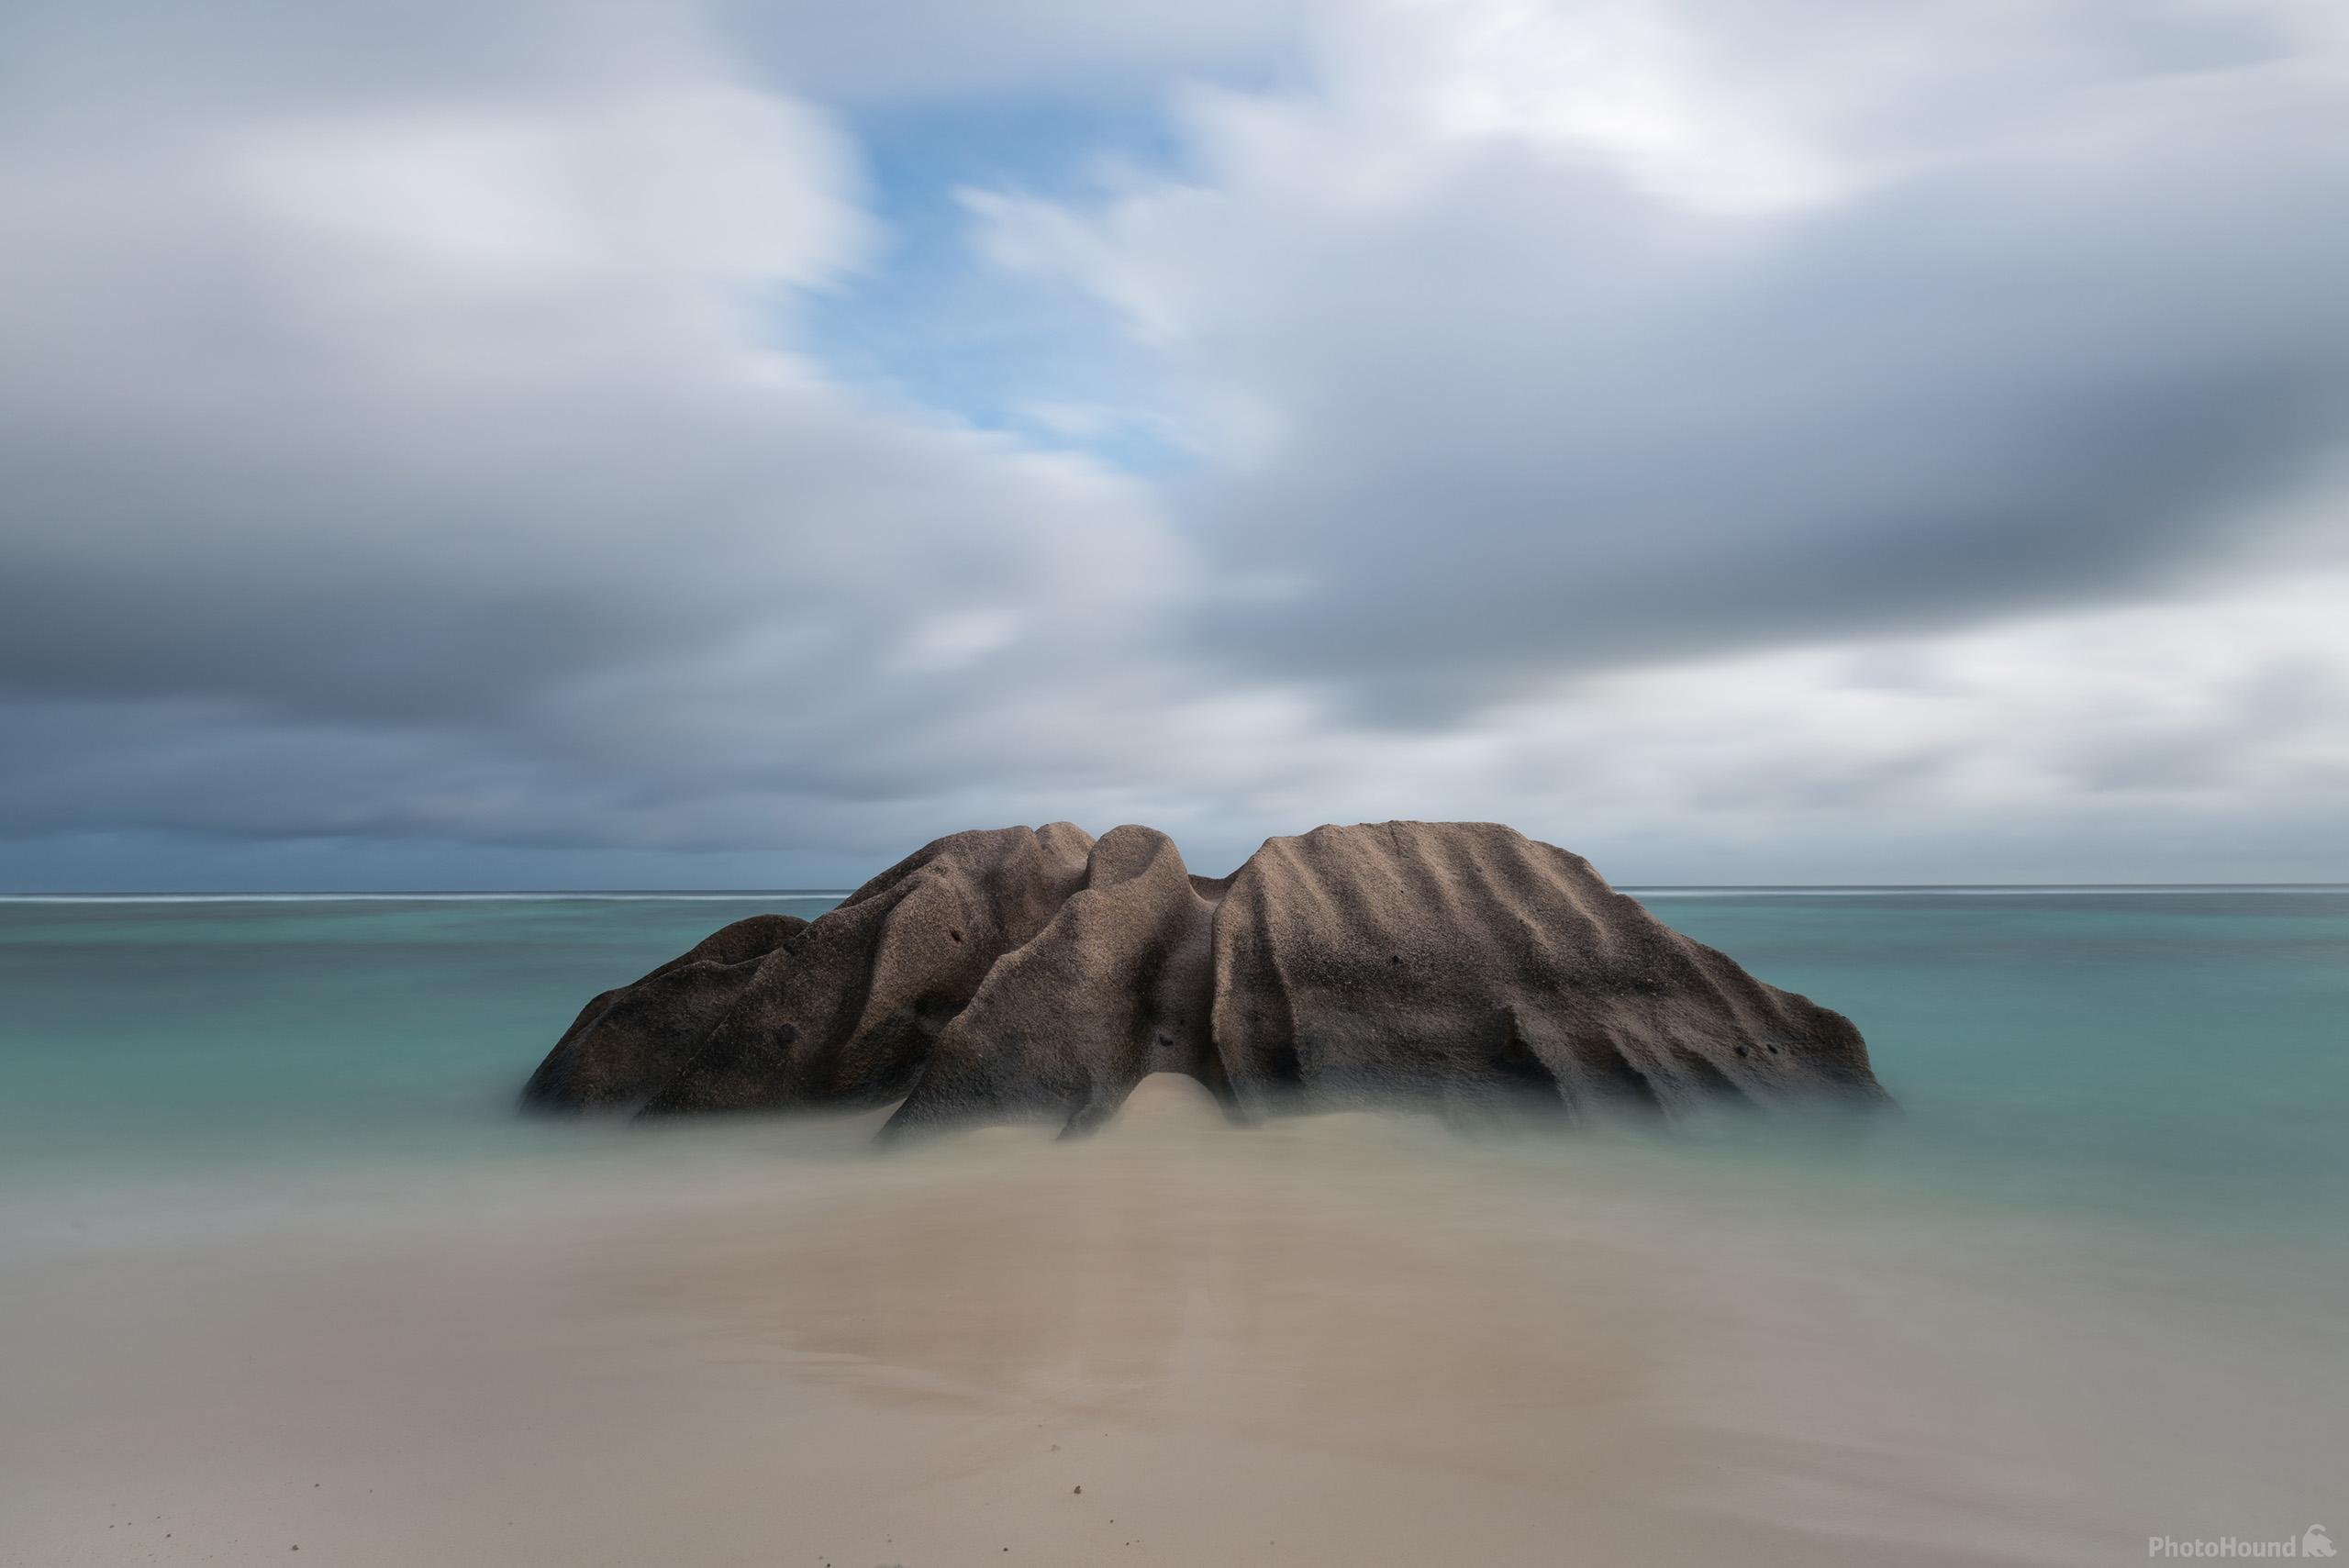 Image of Anse Source d’Argent by Luka Esenko